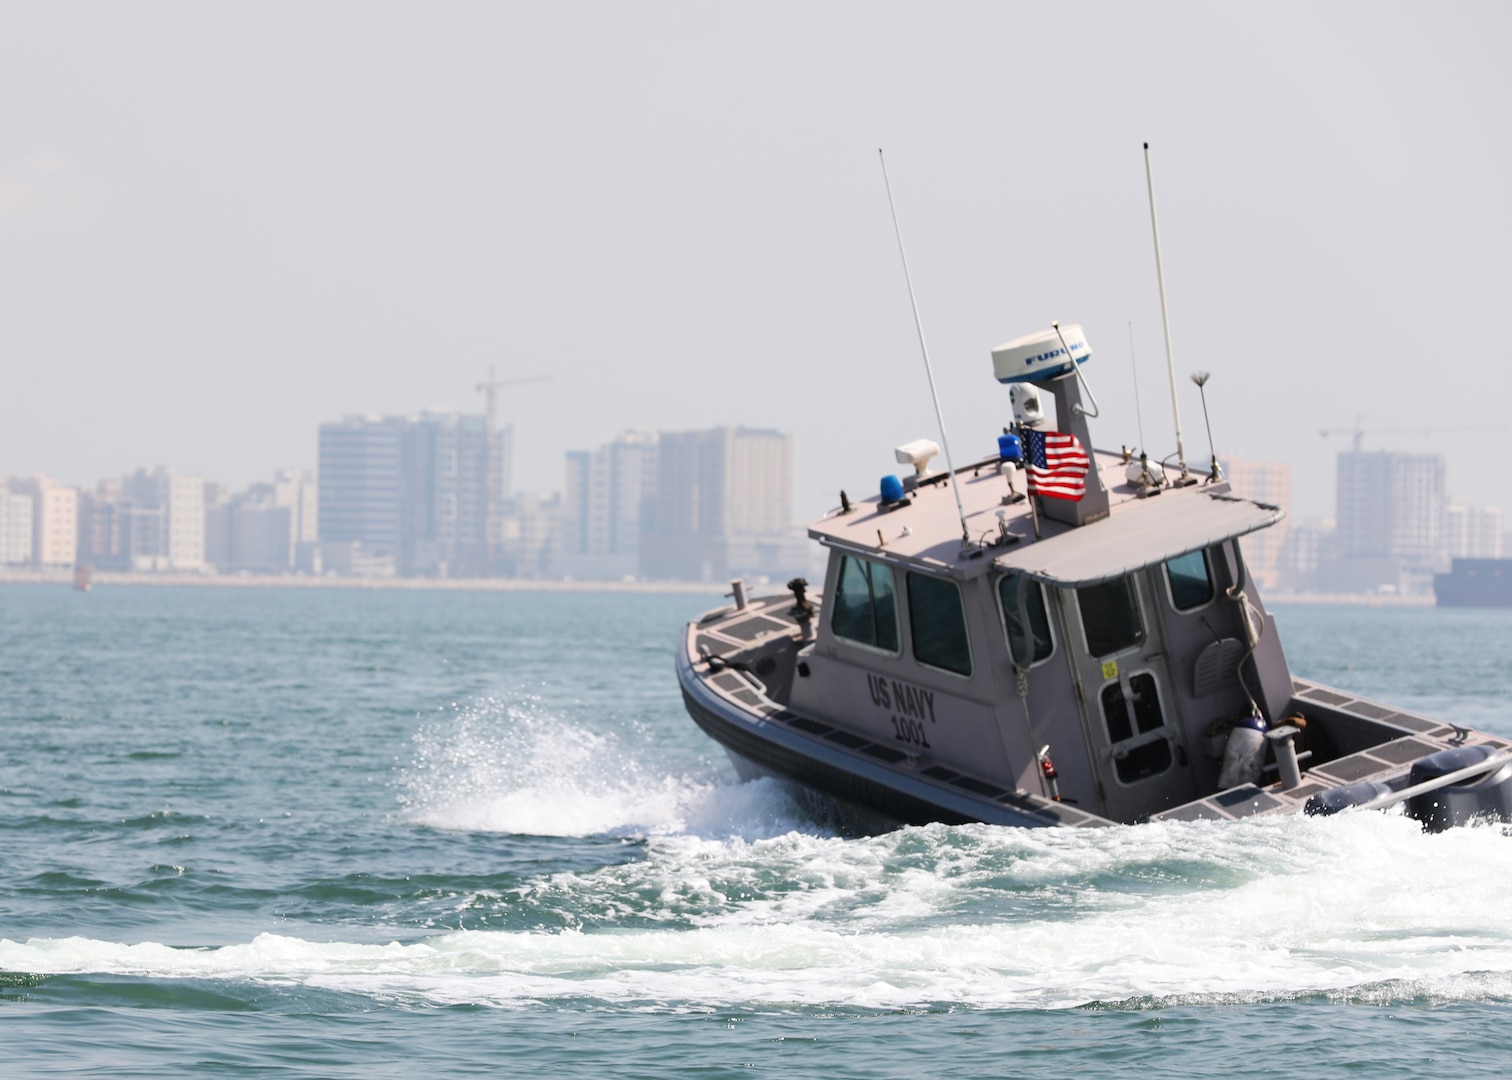 Sailors assigned to Task Force Shore Battle Space pursue a Bahraini Coast Guard security boat during exercise Neon Defender 19. Exercise Neon Defender 19 is a bilateral surface and maritime security exercise between the U.S. Navy and Bahrain Defense Force to enhance interoperability and war fighting readiness, fortify military- to- military relationships between the United States and the Kingdom of Bahrain, advance mutual operational capabilities and strengthen civil-to-military relationships. (U.S. Army Photo by Spc. Eric Cerami/Released)